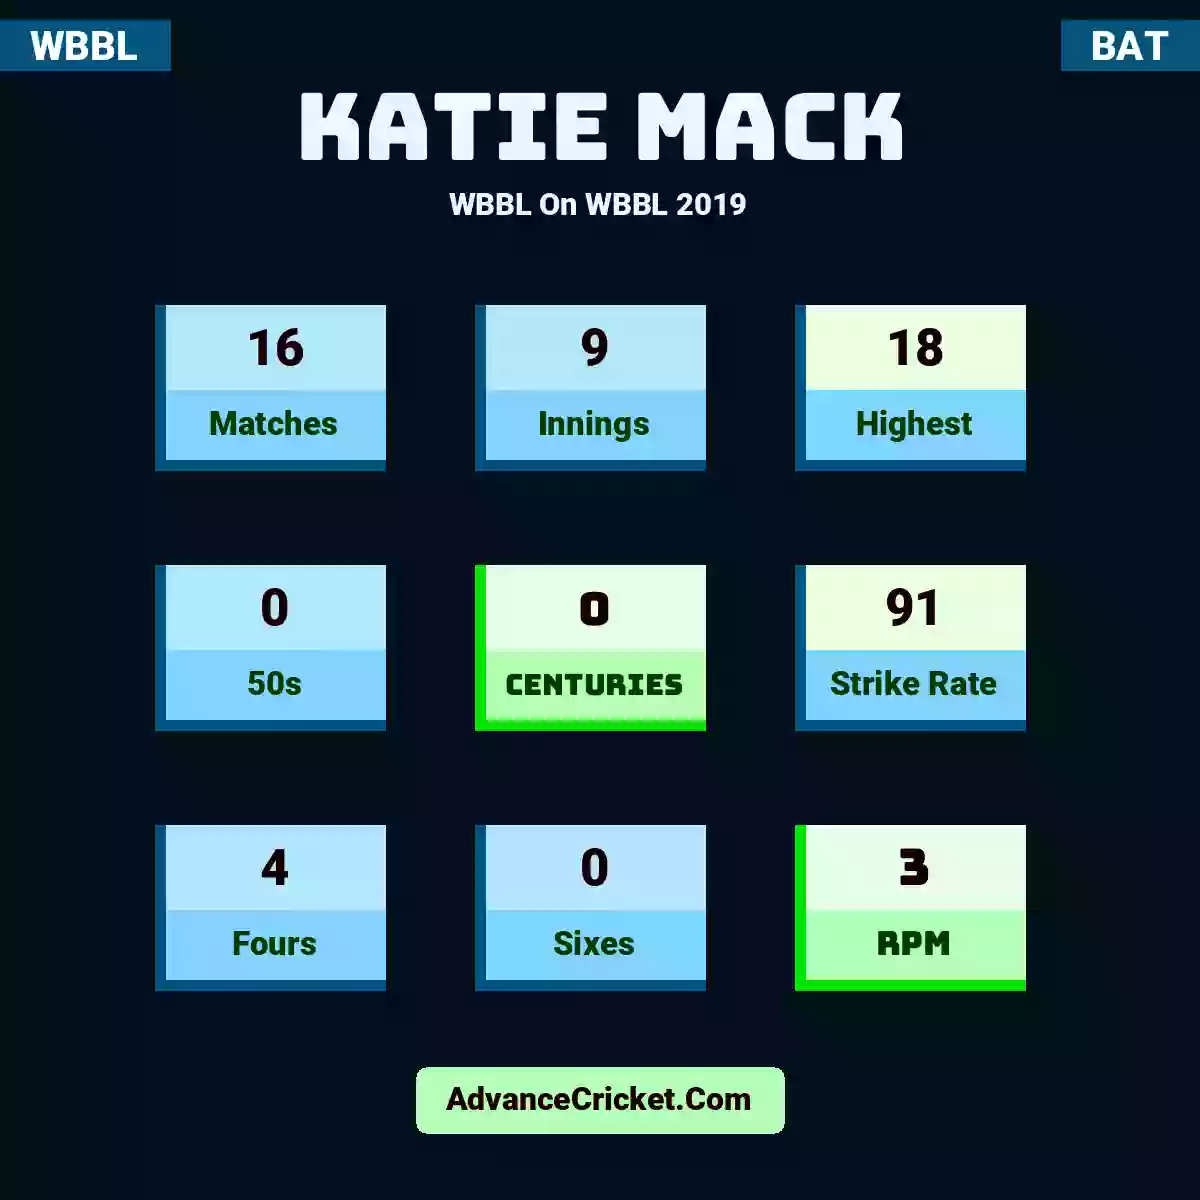 Katie Mack WBBL  On WBBL 2019, Katie Mack played 16 matches, scored 18 runs as highest, 0 half-centuries, and 0 centuries, with a strike rate of 91. K.Mack hit 4 fours and 0 sixes, with an RPM of 3.